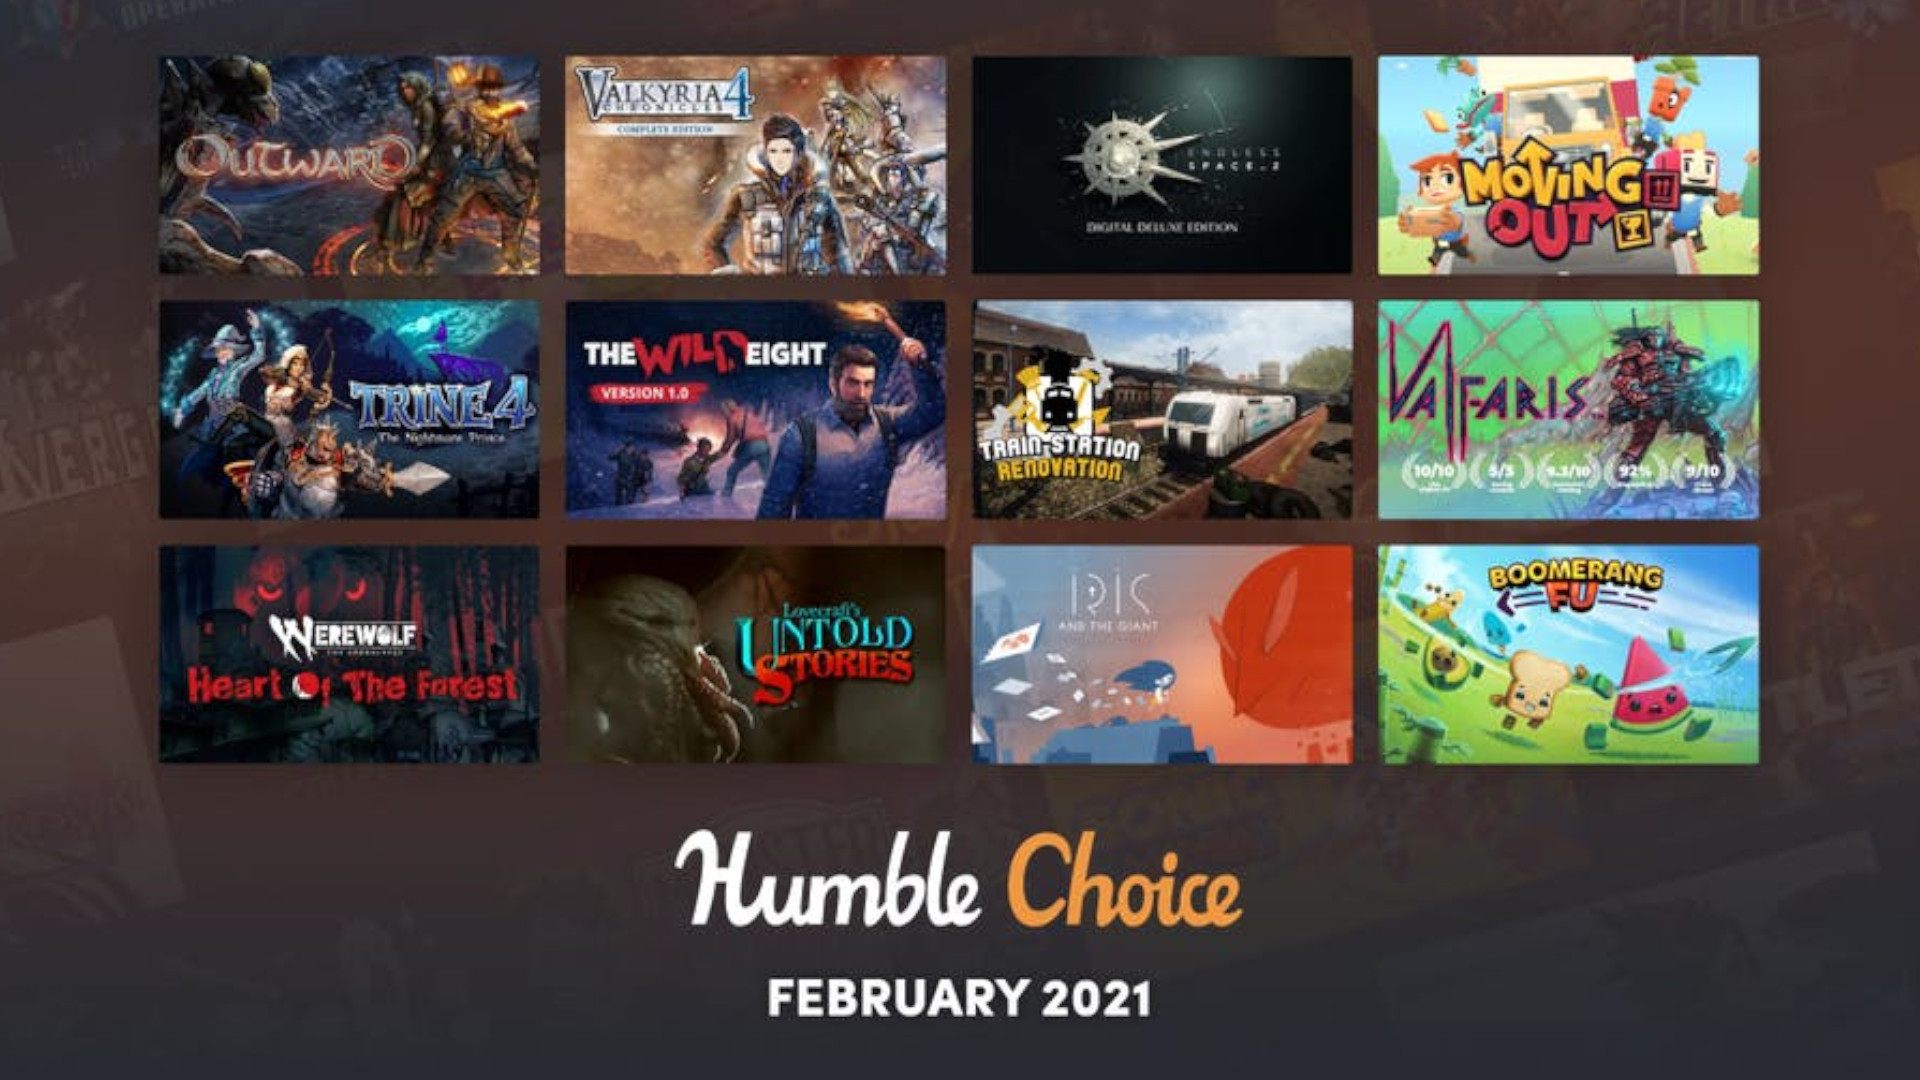 Here are your Humble Choice games for February 2021